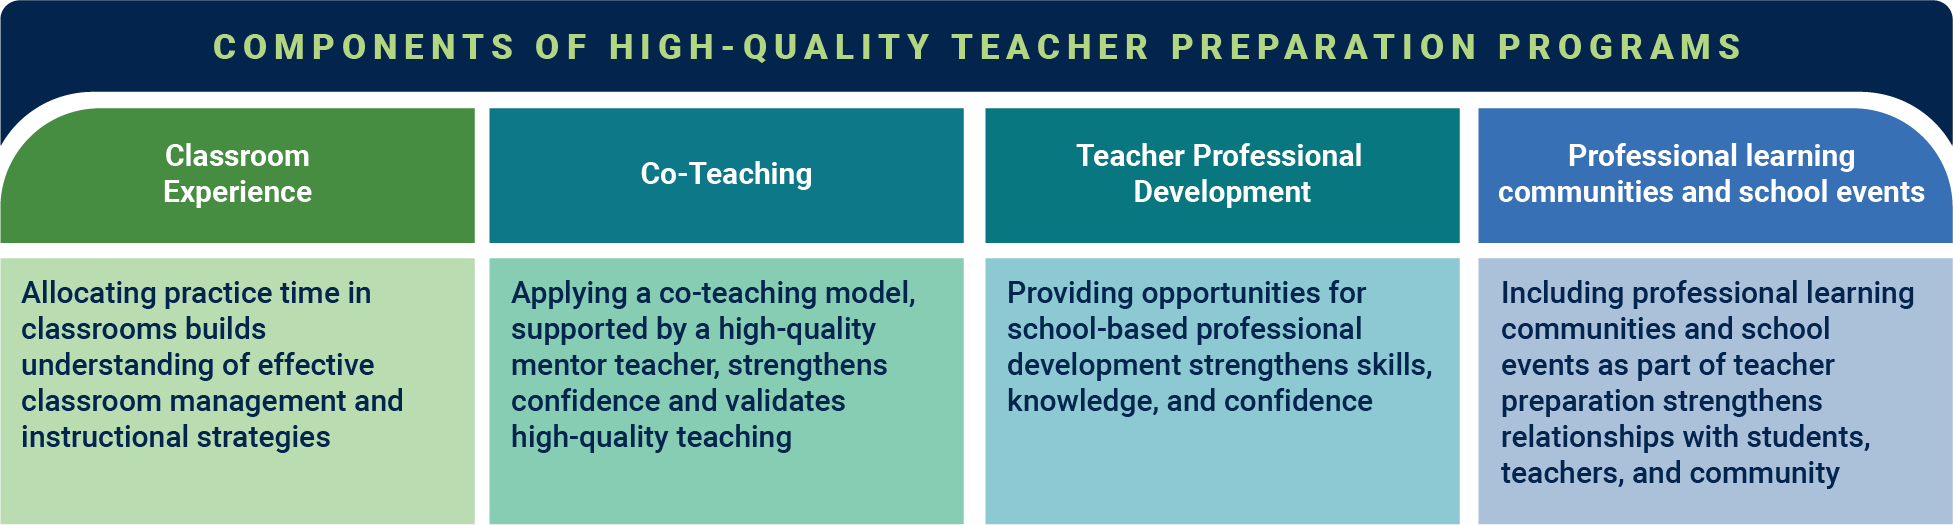 Components of High-Quality Teacher Preparation Programs